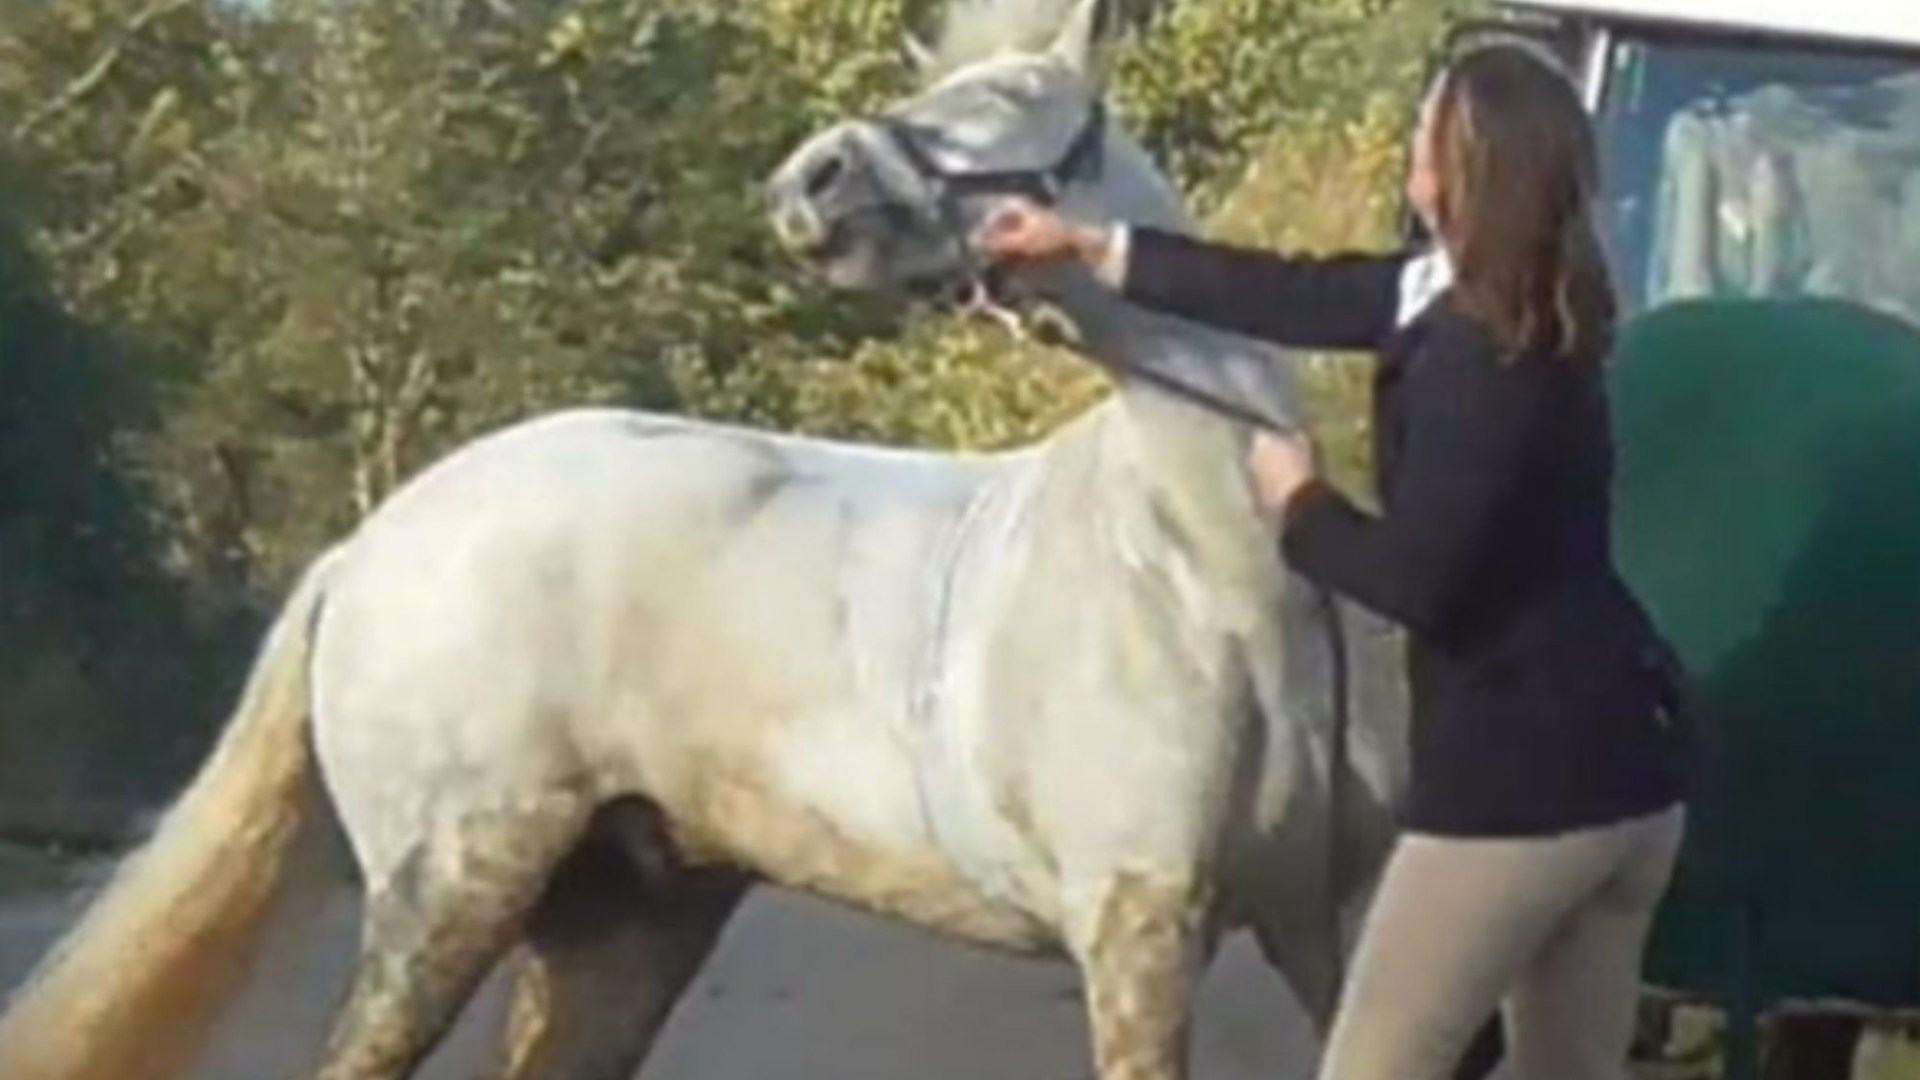 Ex-school teacher Sarah Moulds sobs 'my life has been torn to pieces' after moment she punched horse is played in court